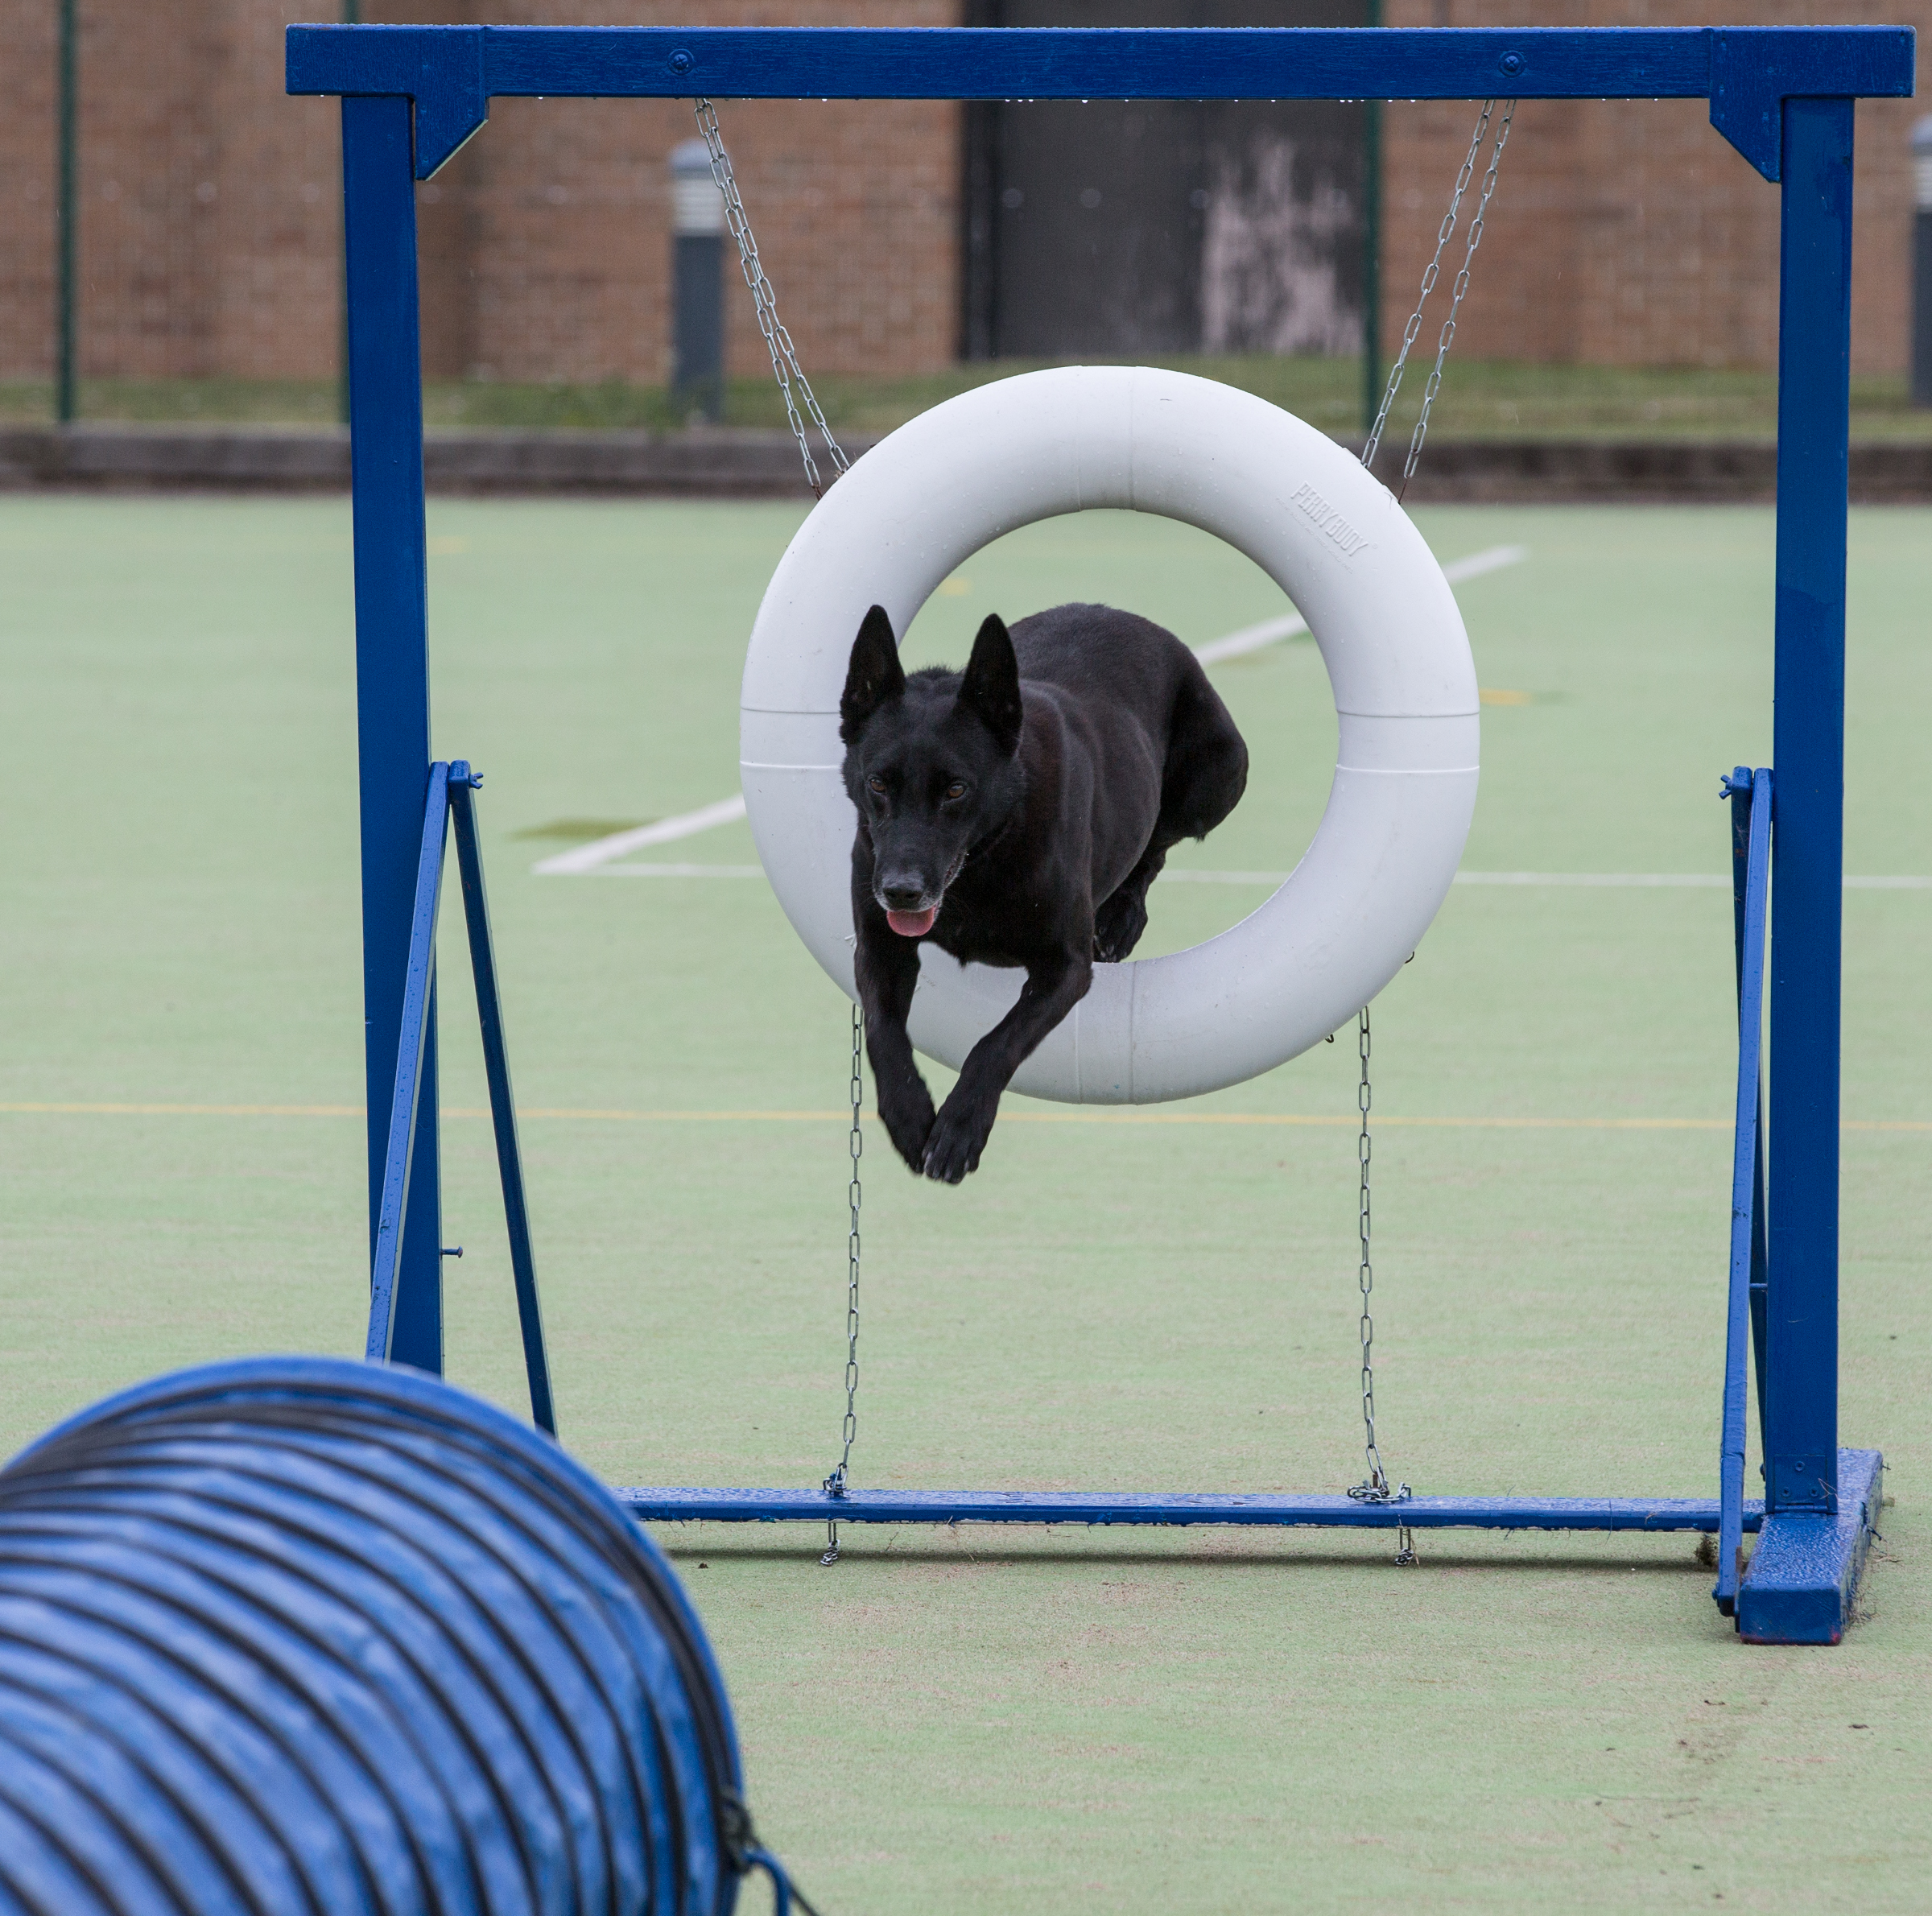 Image shows Military Working Dog Jumping through a hoop.